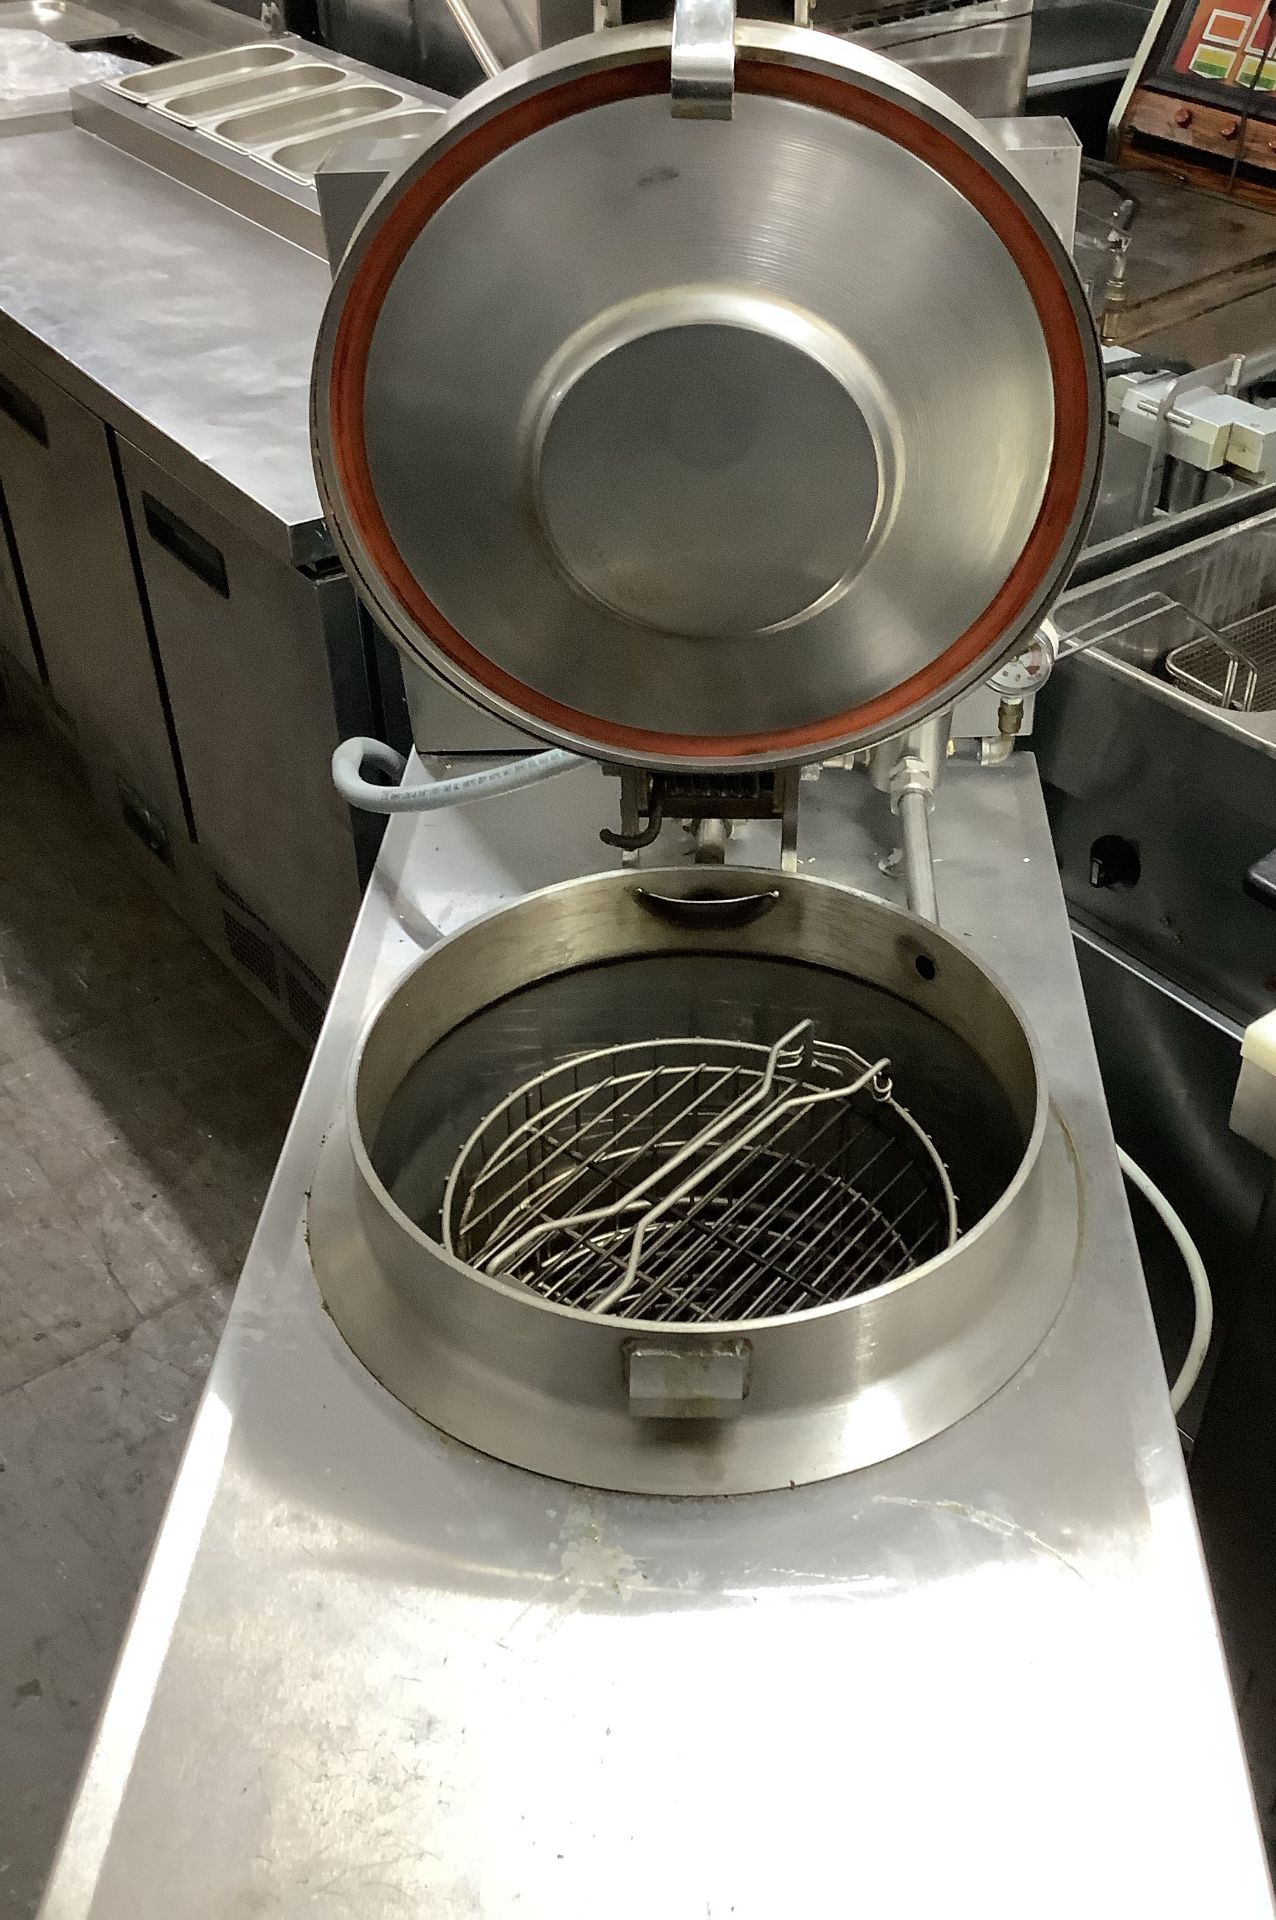 BKI Chicken Pressure Fryer Electric, 3 Phase - Image 2 of 4